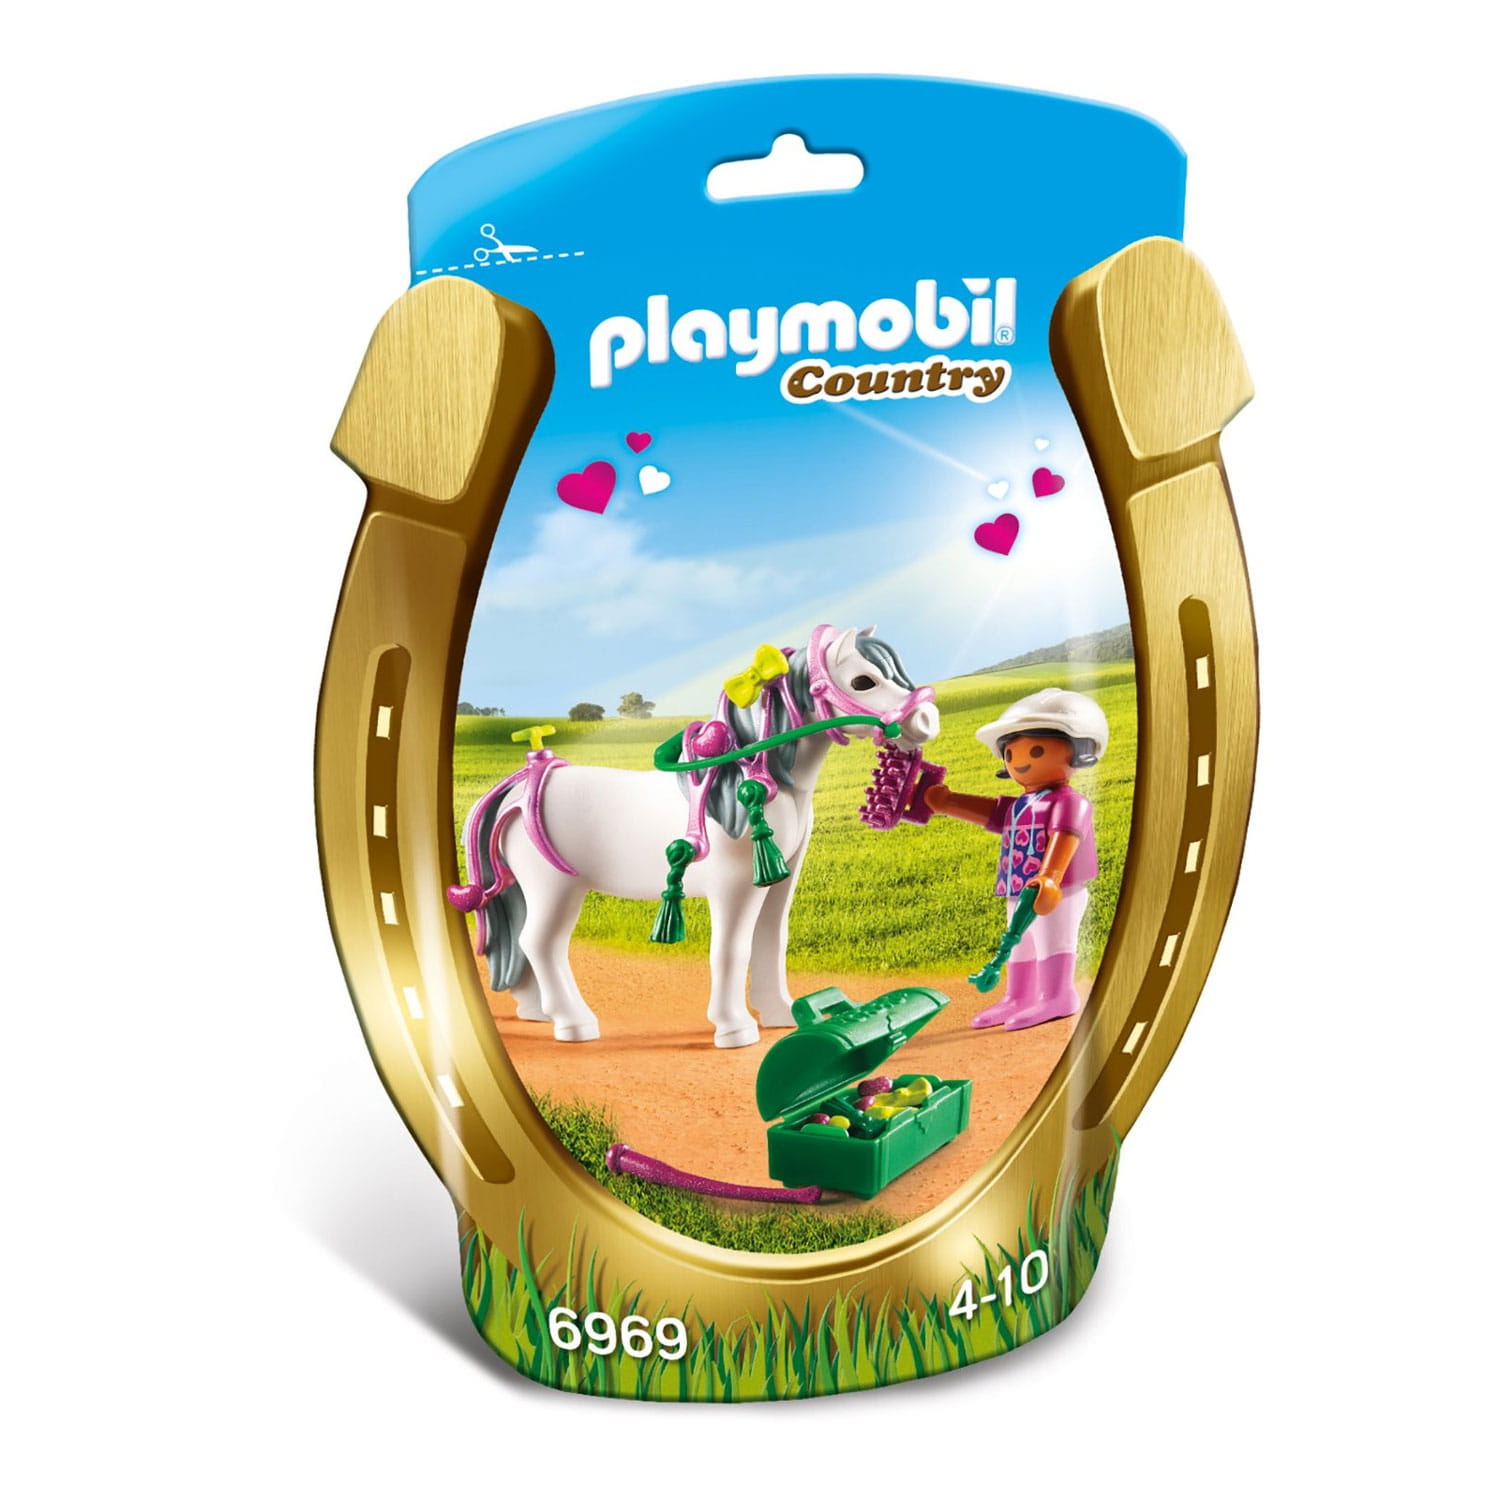 PLAYMOBIL - SOFT BAGS - COUNTRY - 6969